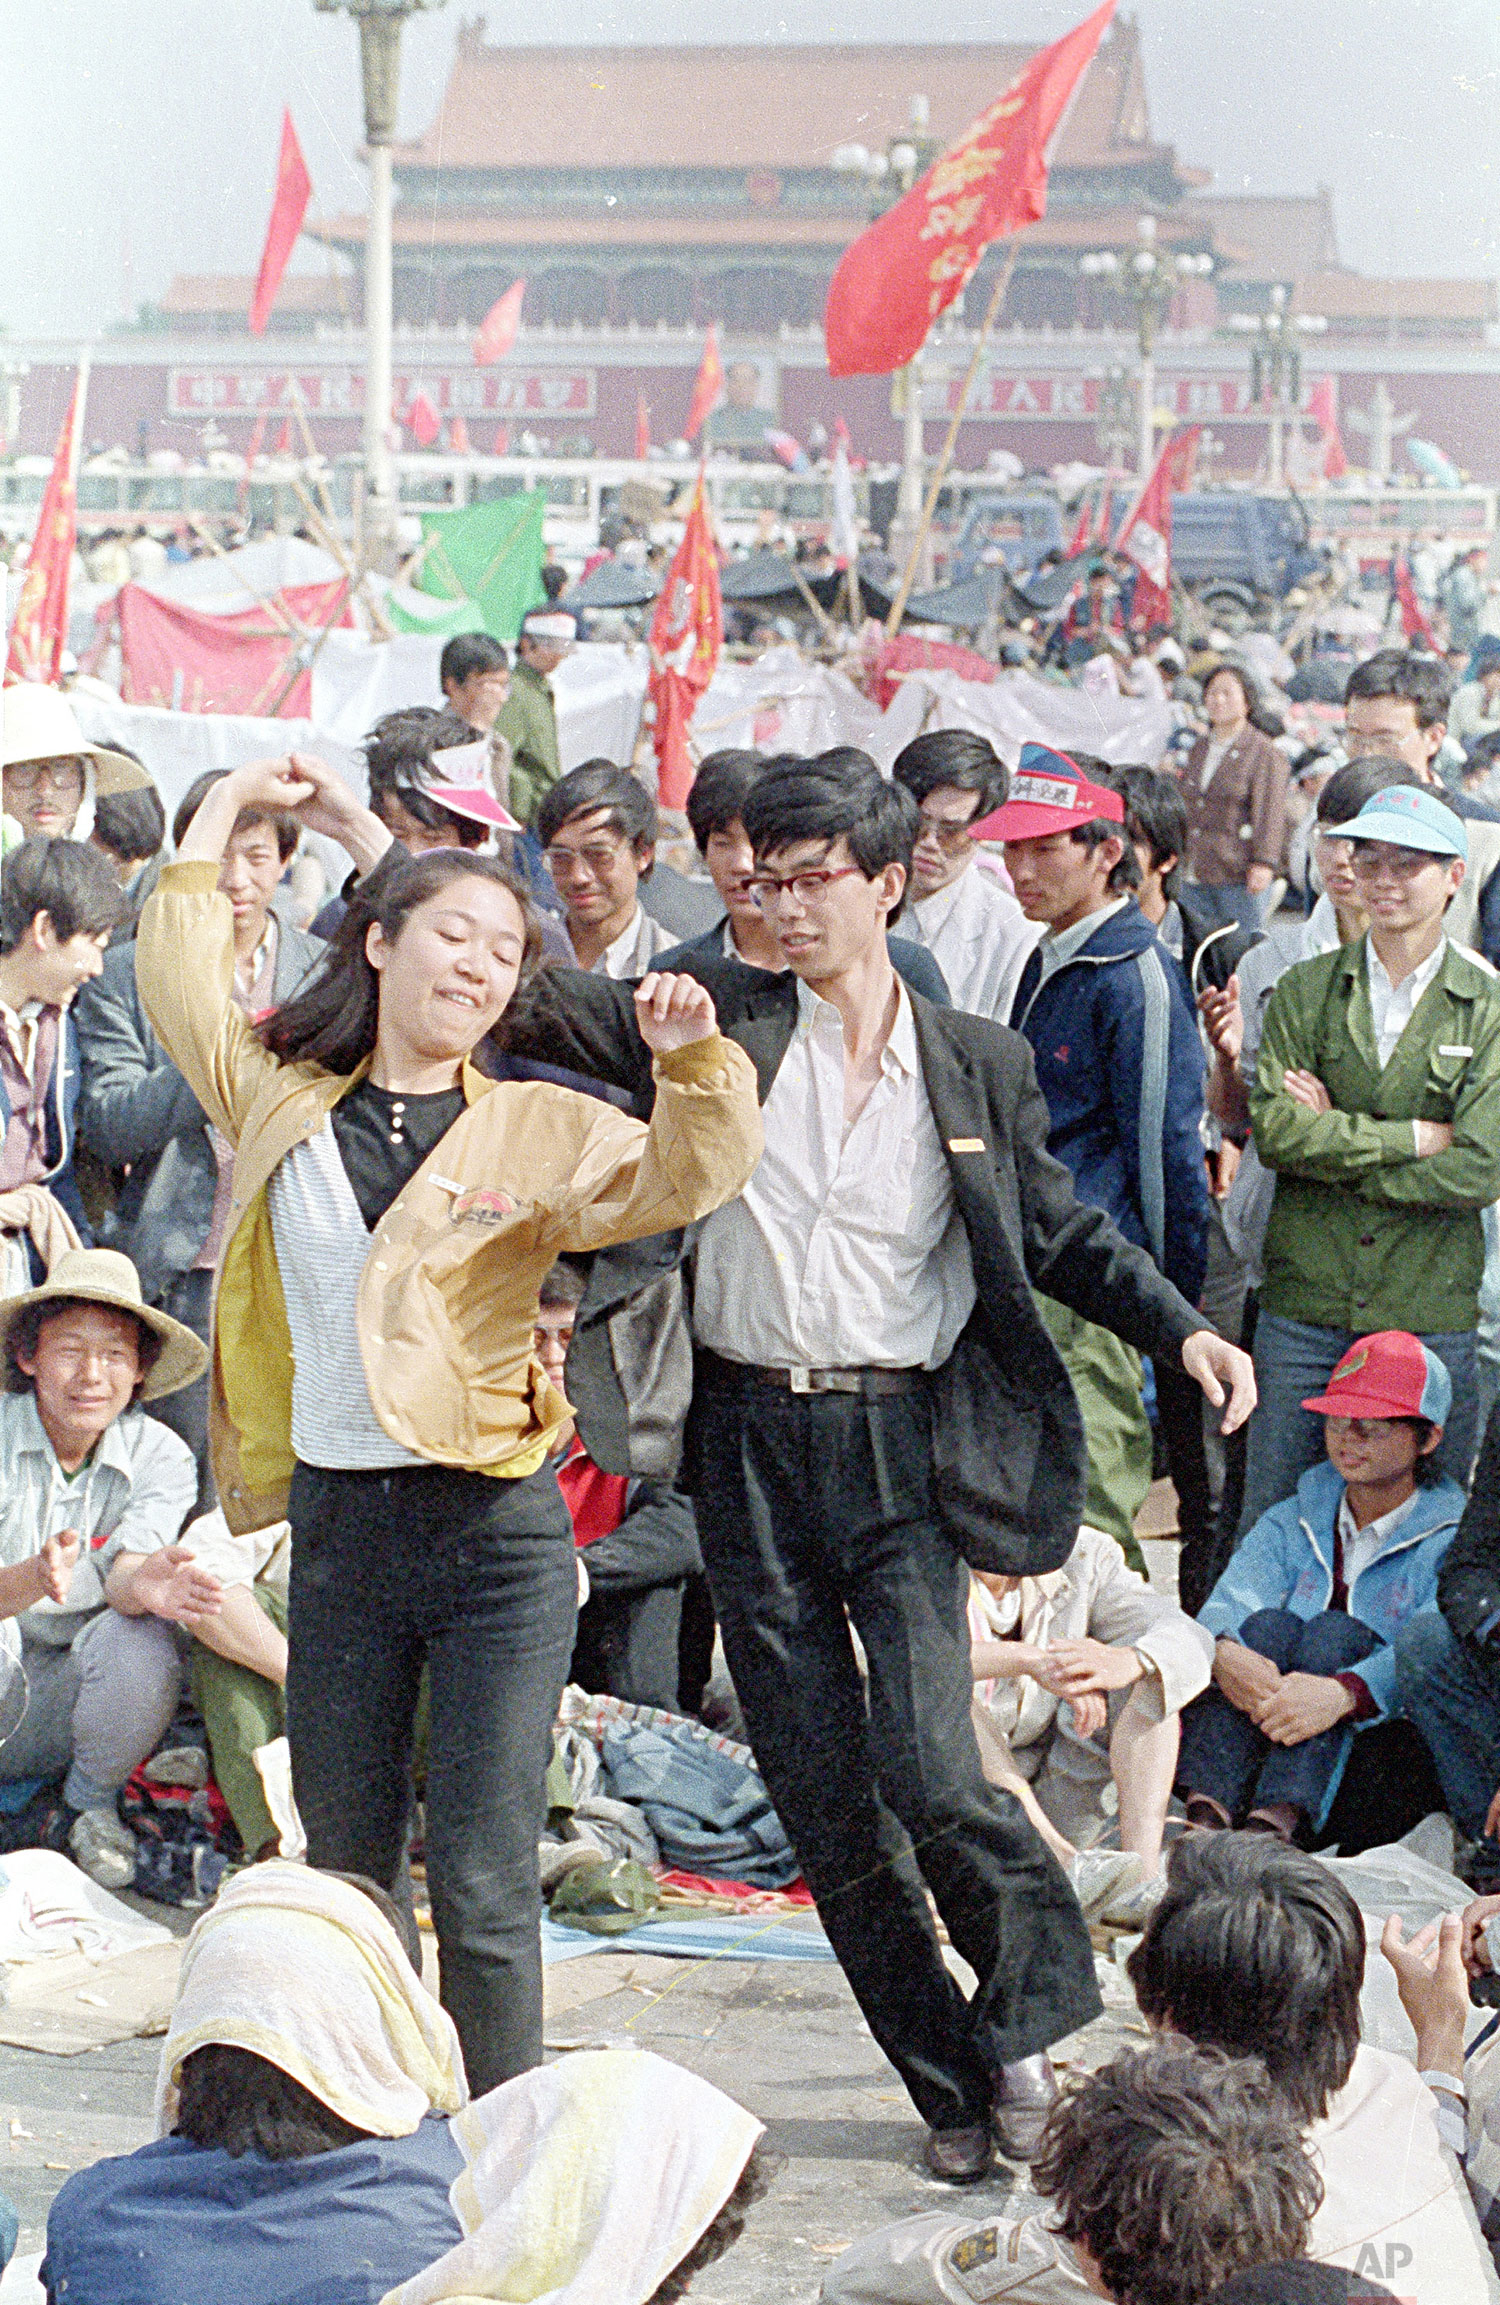 tiananmen-square-30-years-since-democracy-protests-squashed-ap-photos